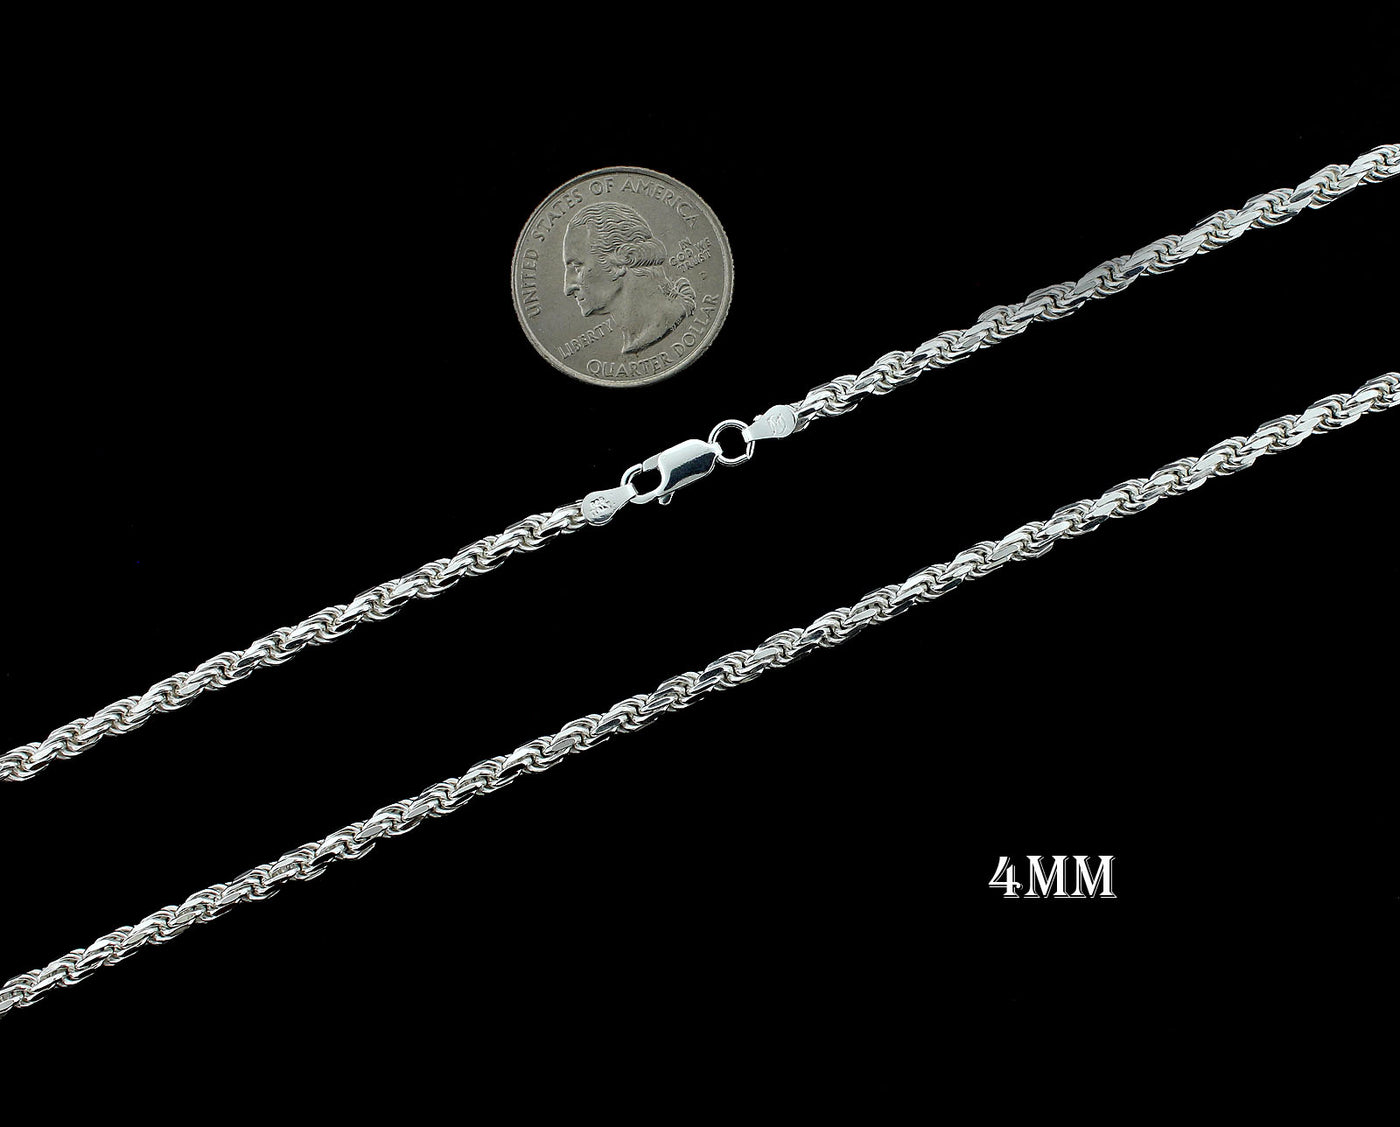 4MM Solid 925 Sterling Silver Italian DIAMOND CUT ROPE CHAIN Necklace UNISEX